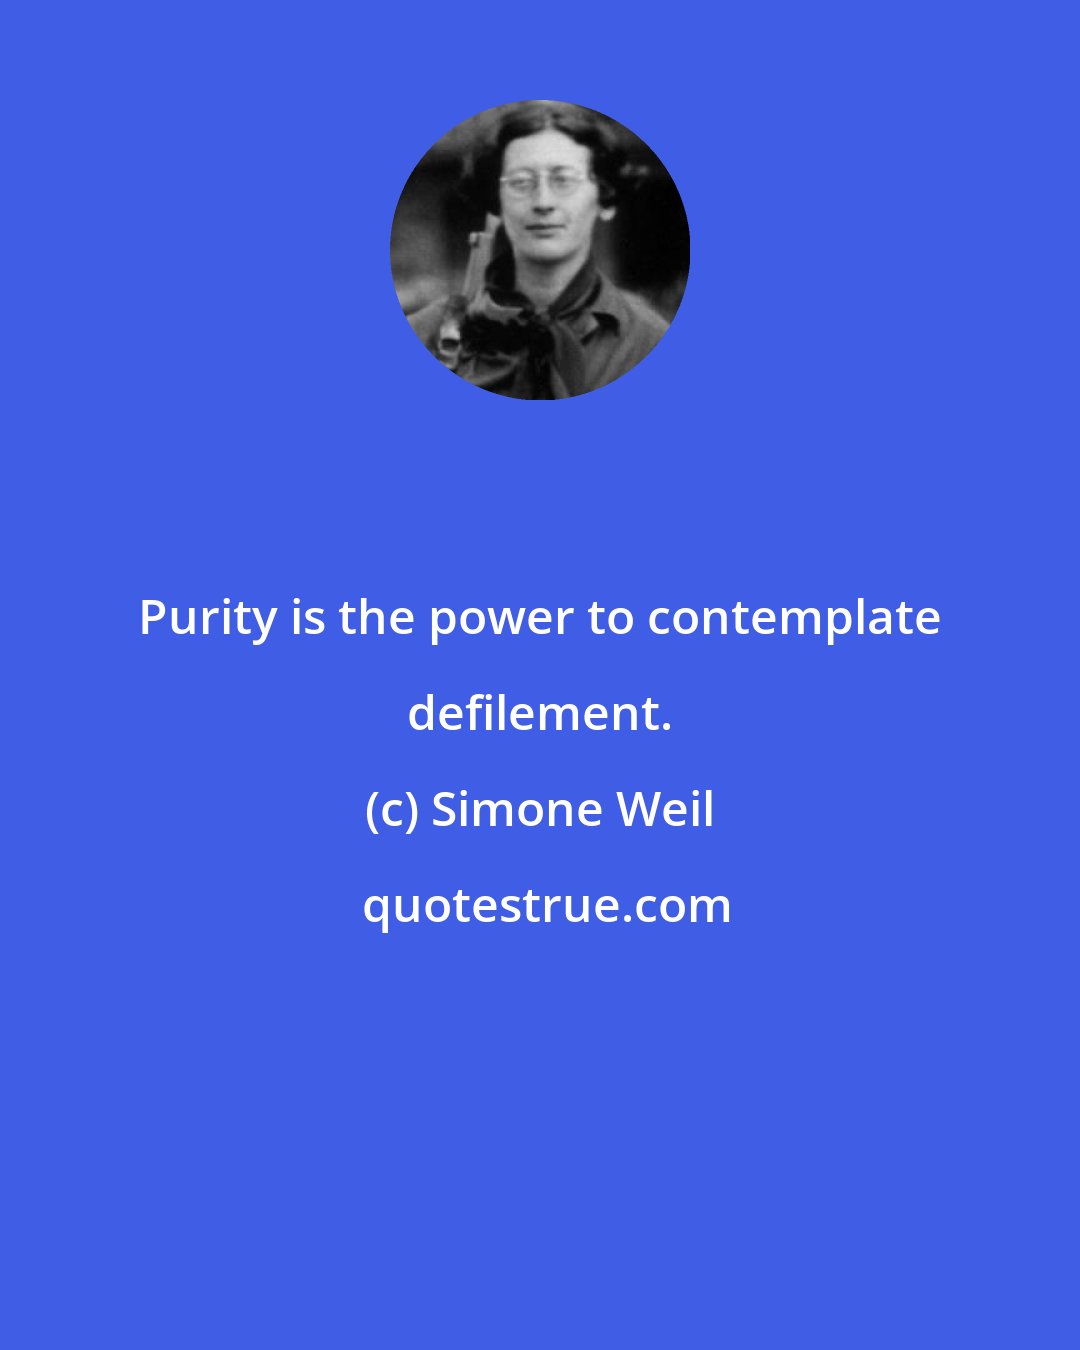 Simone Weil: Purity is the power to contemplate defilement.